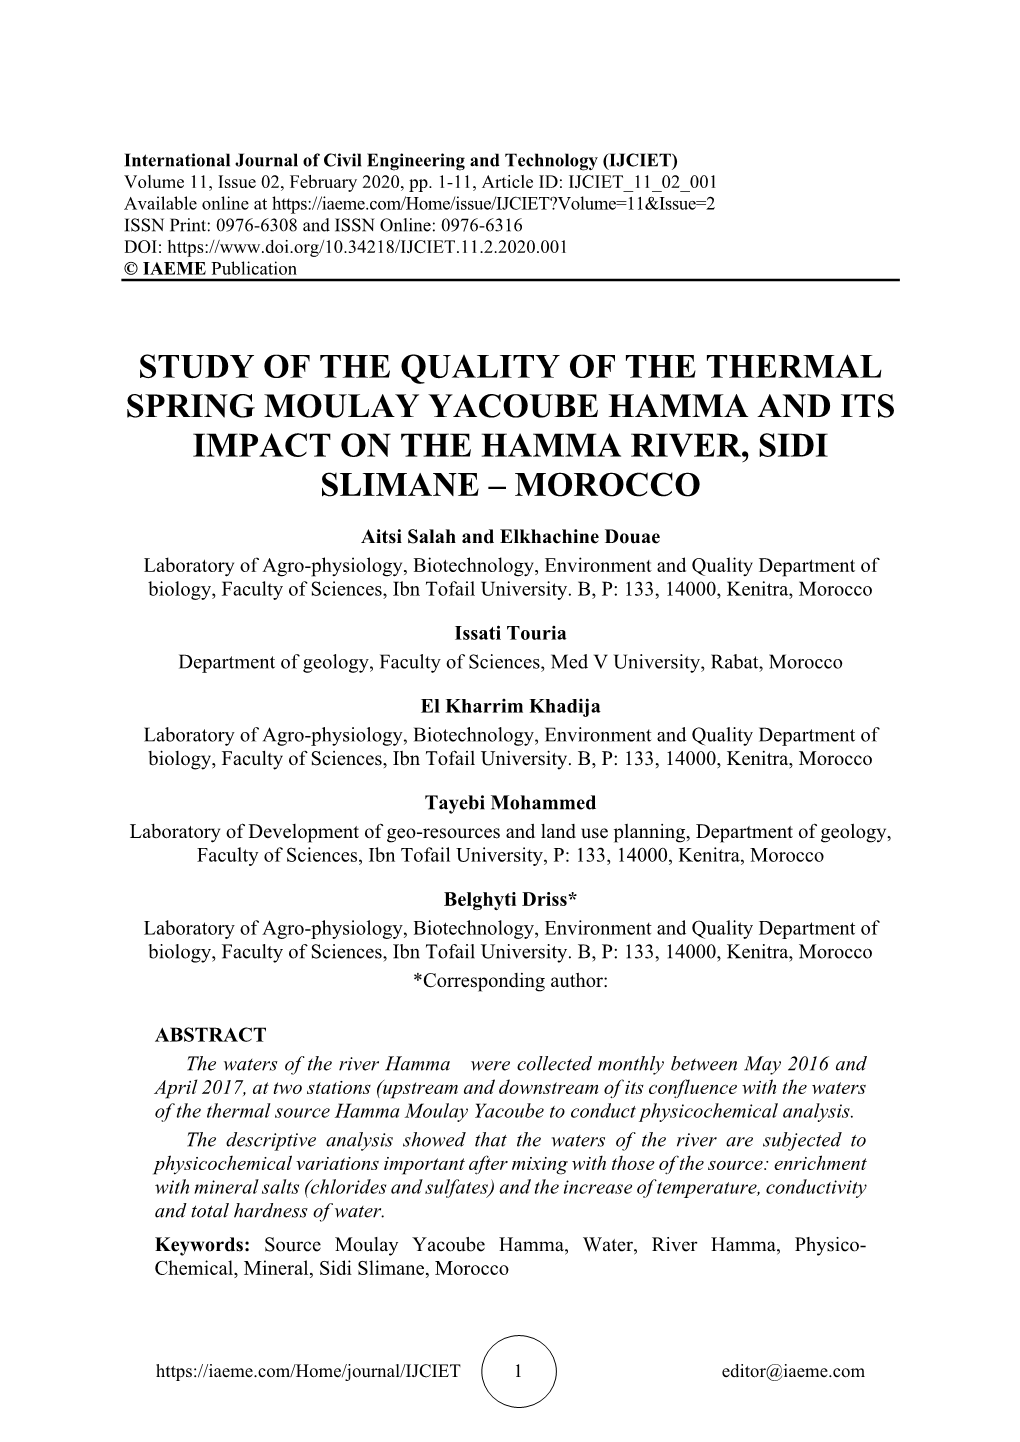 Study of the Quality of the Thermal Spring Moulay Yacoube Hamma and Its Impact on the Hamma River, Sidi Slimane – Morocco